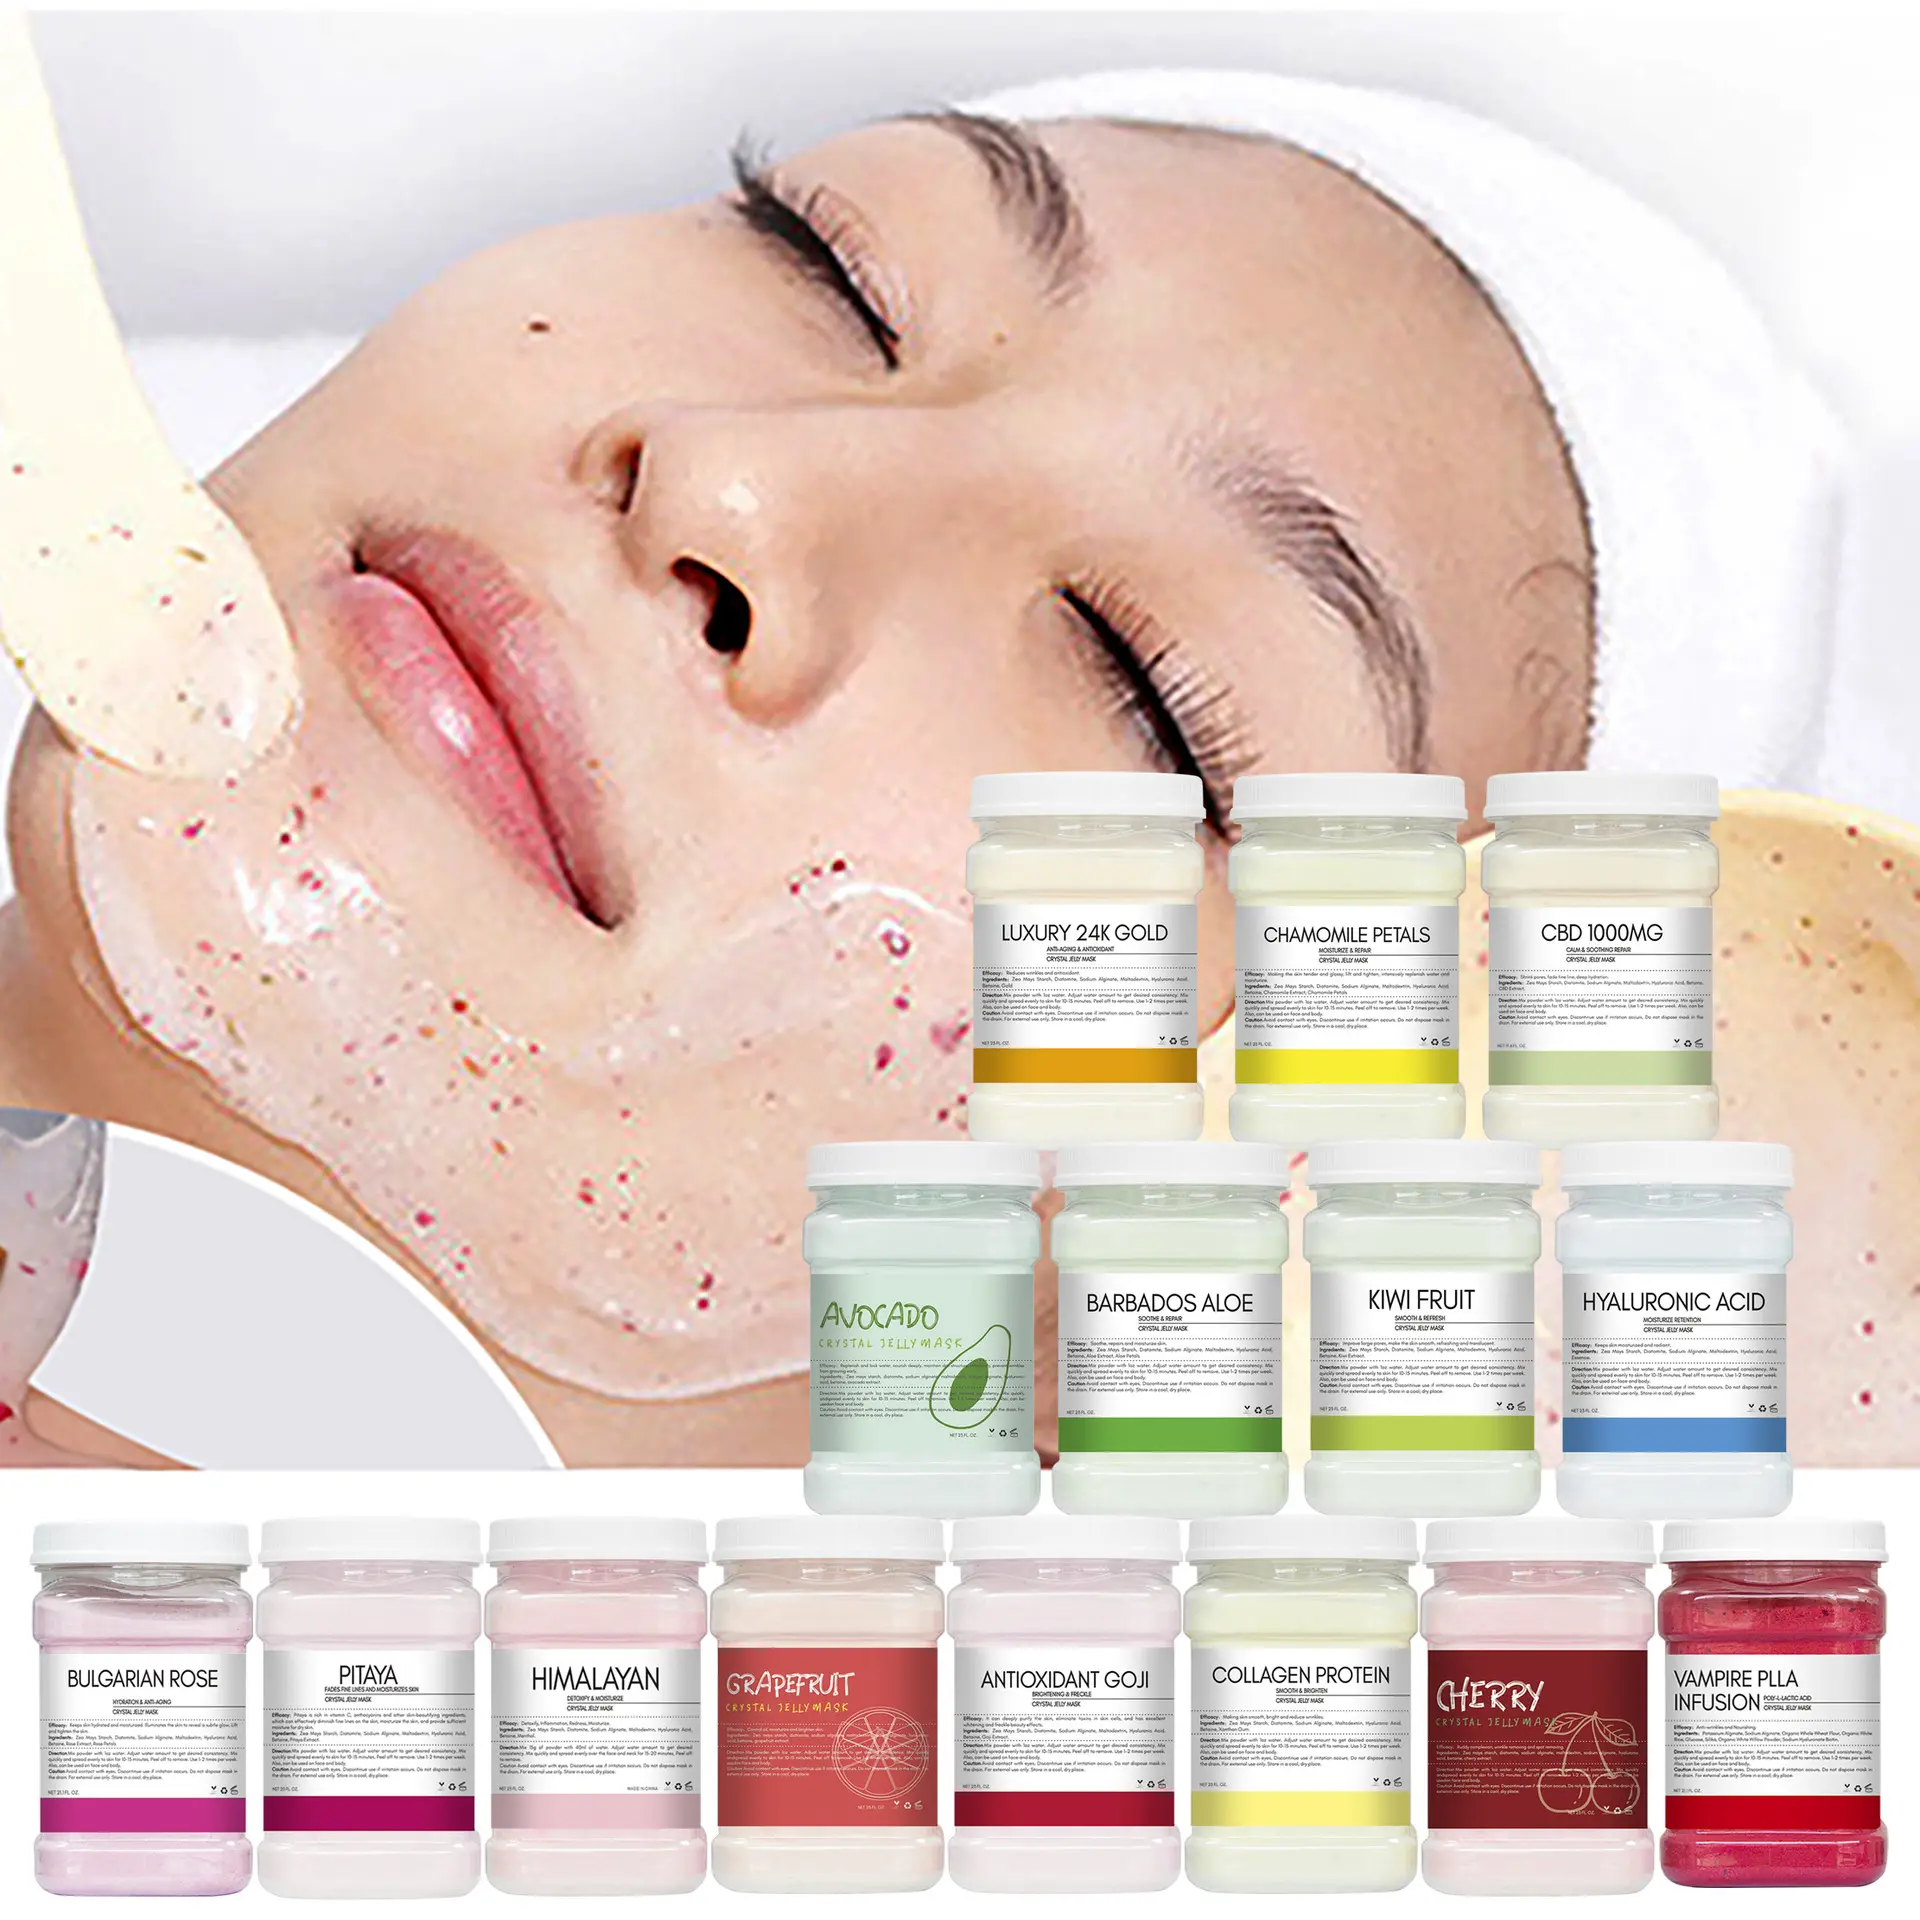 650G Jelly Face Mask Powder Facial DIY Hydrojelly Masks Peel Off Professional Collagen Rose Facial Skin Care Product